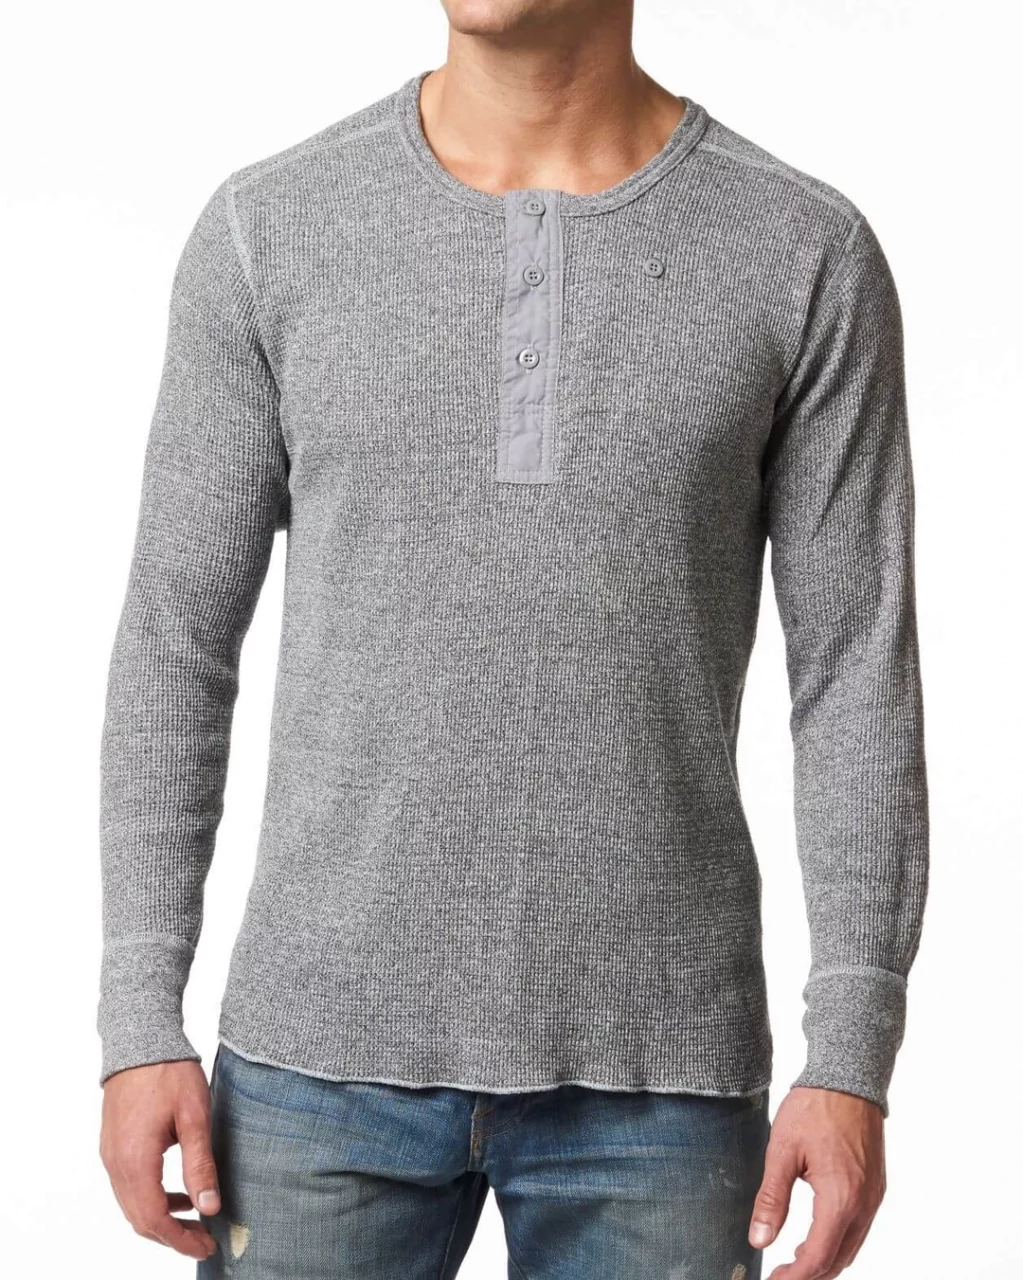 Stanfield’s Undershirt Waffle Knit Henley. Long Sleeve in Grey or Indigo